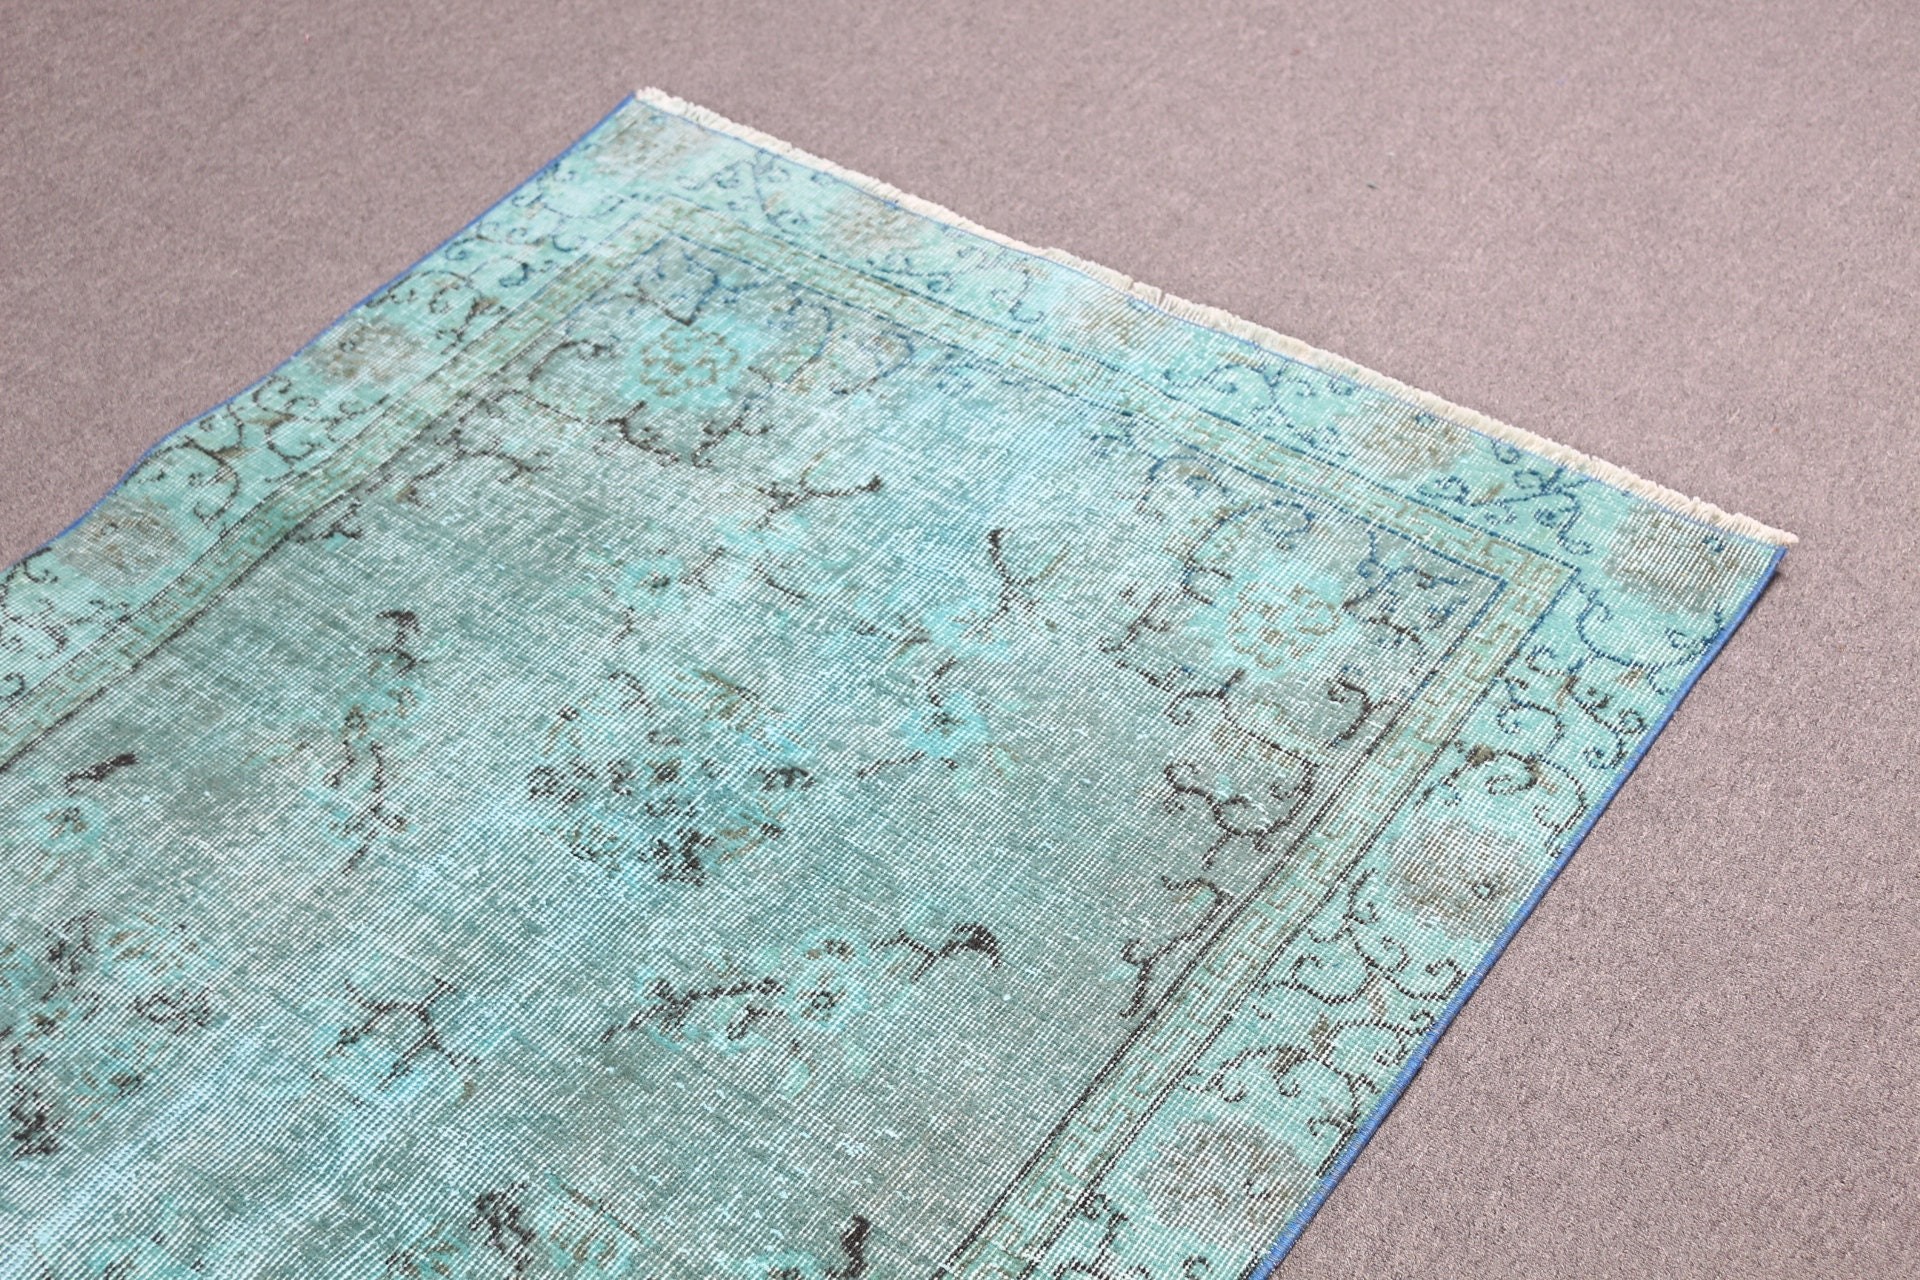 Vintage Rug, Turkish Rugs, Kitchen Rugs, Entry Rug, 3.6x6.6 ft Accent Rug, Nursery Rugs, Home Decor Rugs, Green Cool Rugs, Natural Rugs